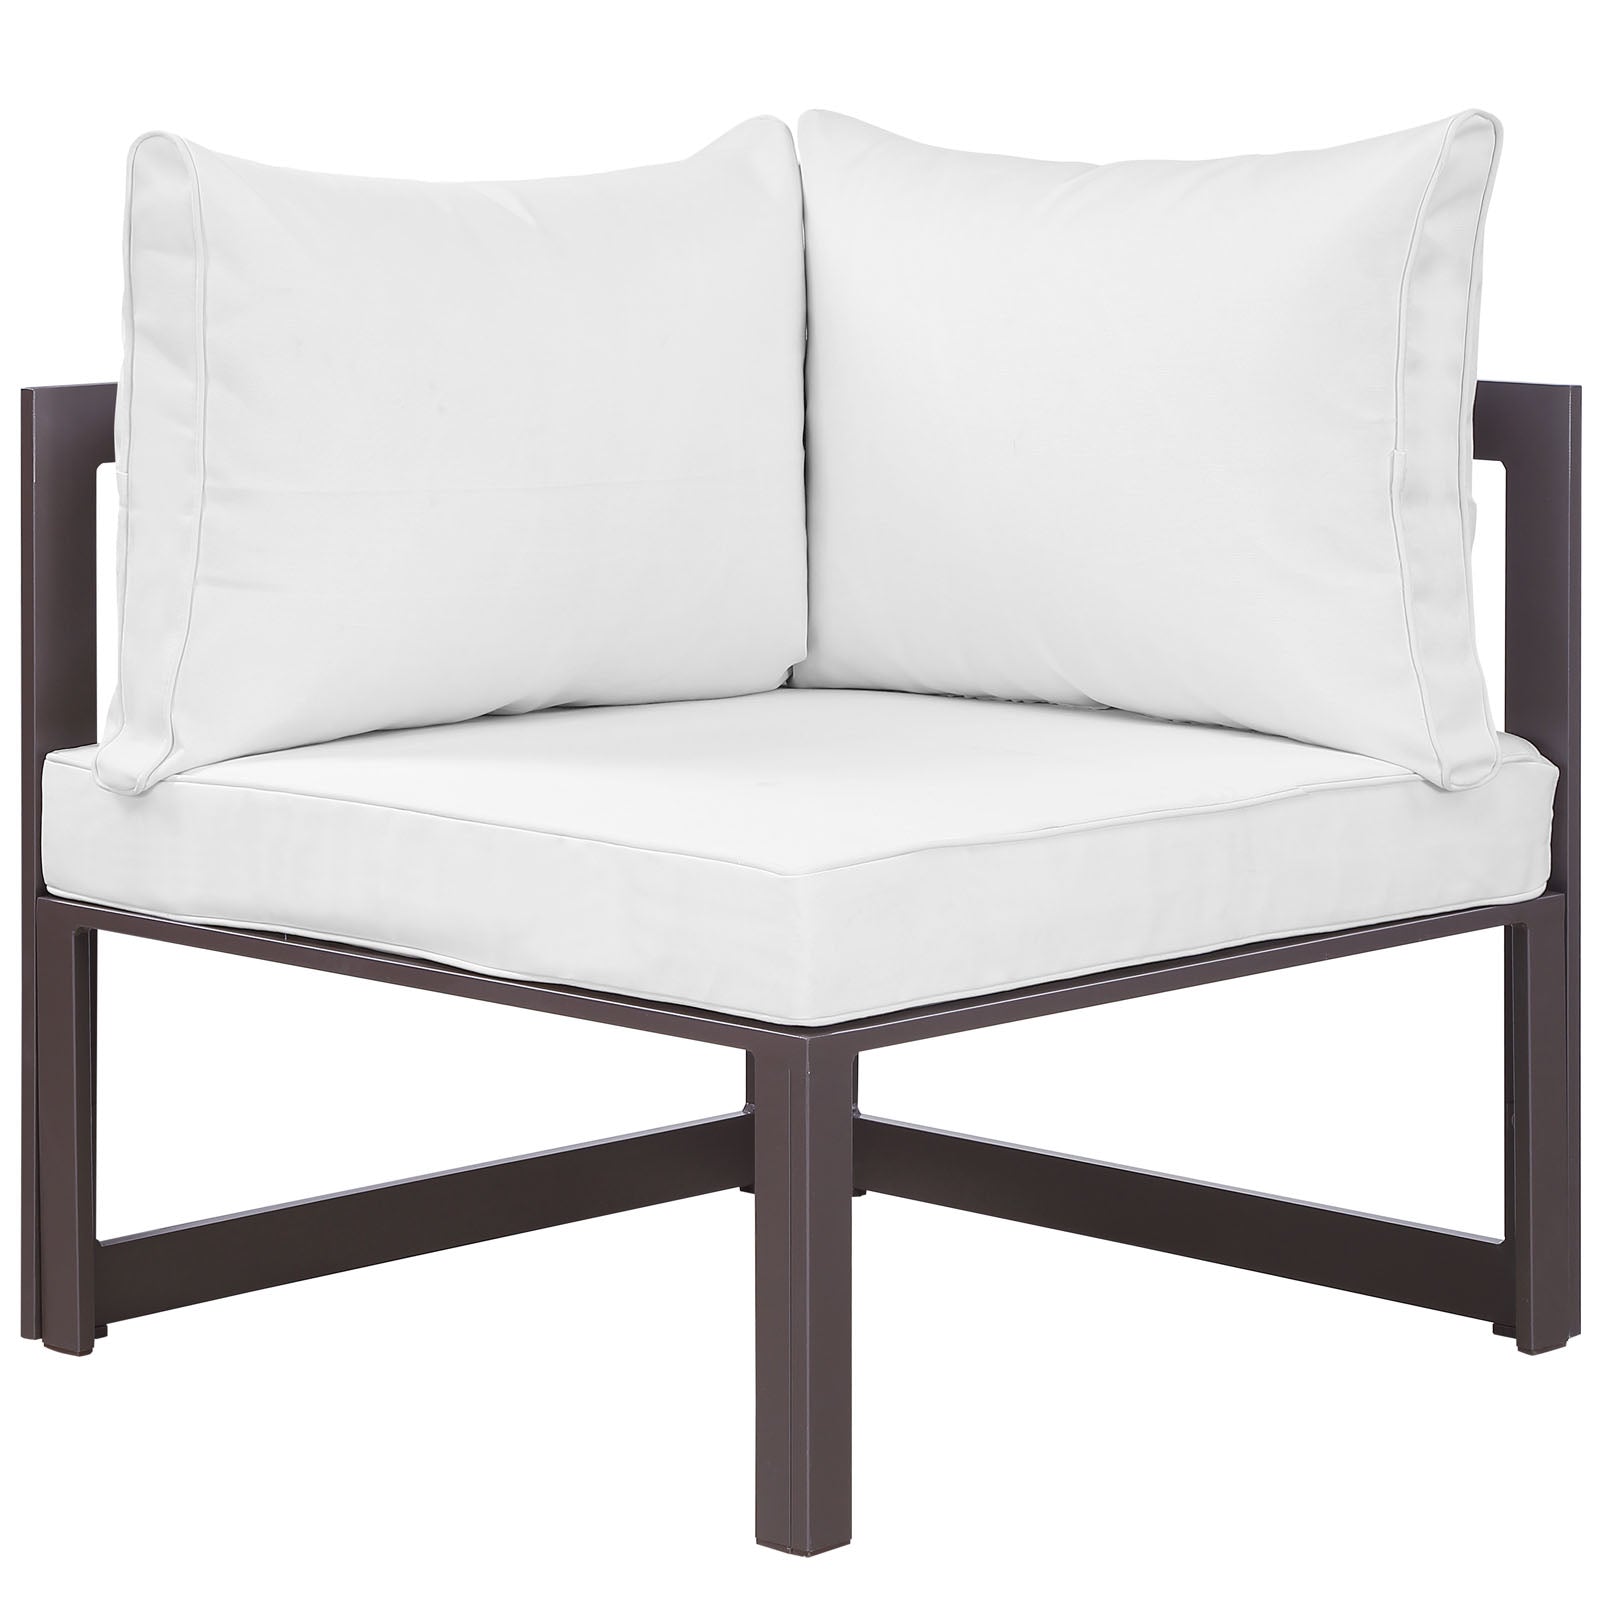 Modway Outdoor Chairs - Fortuna Corner Outdoor Patio Chair Brown & White